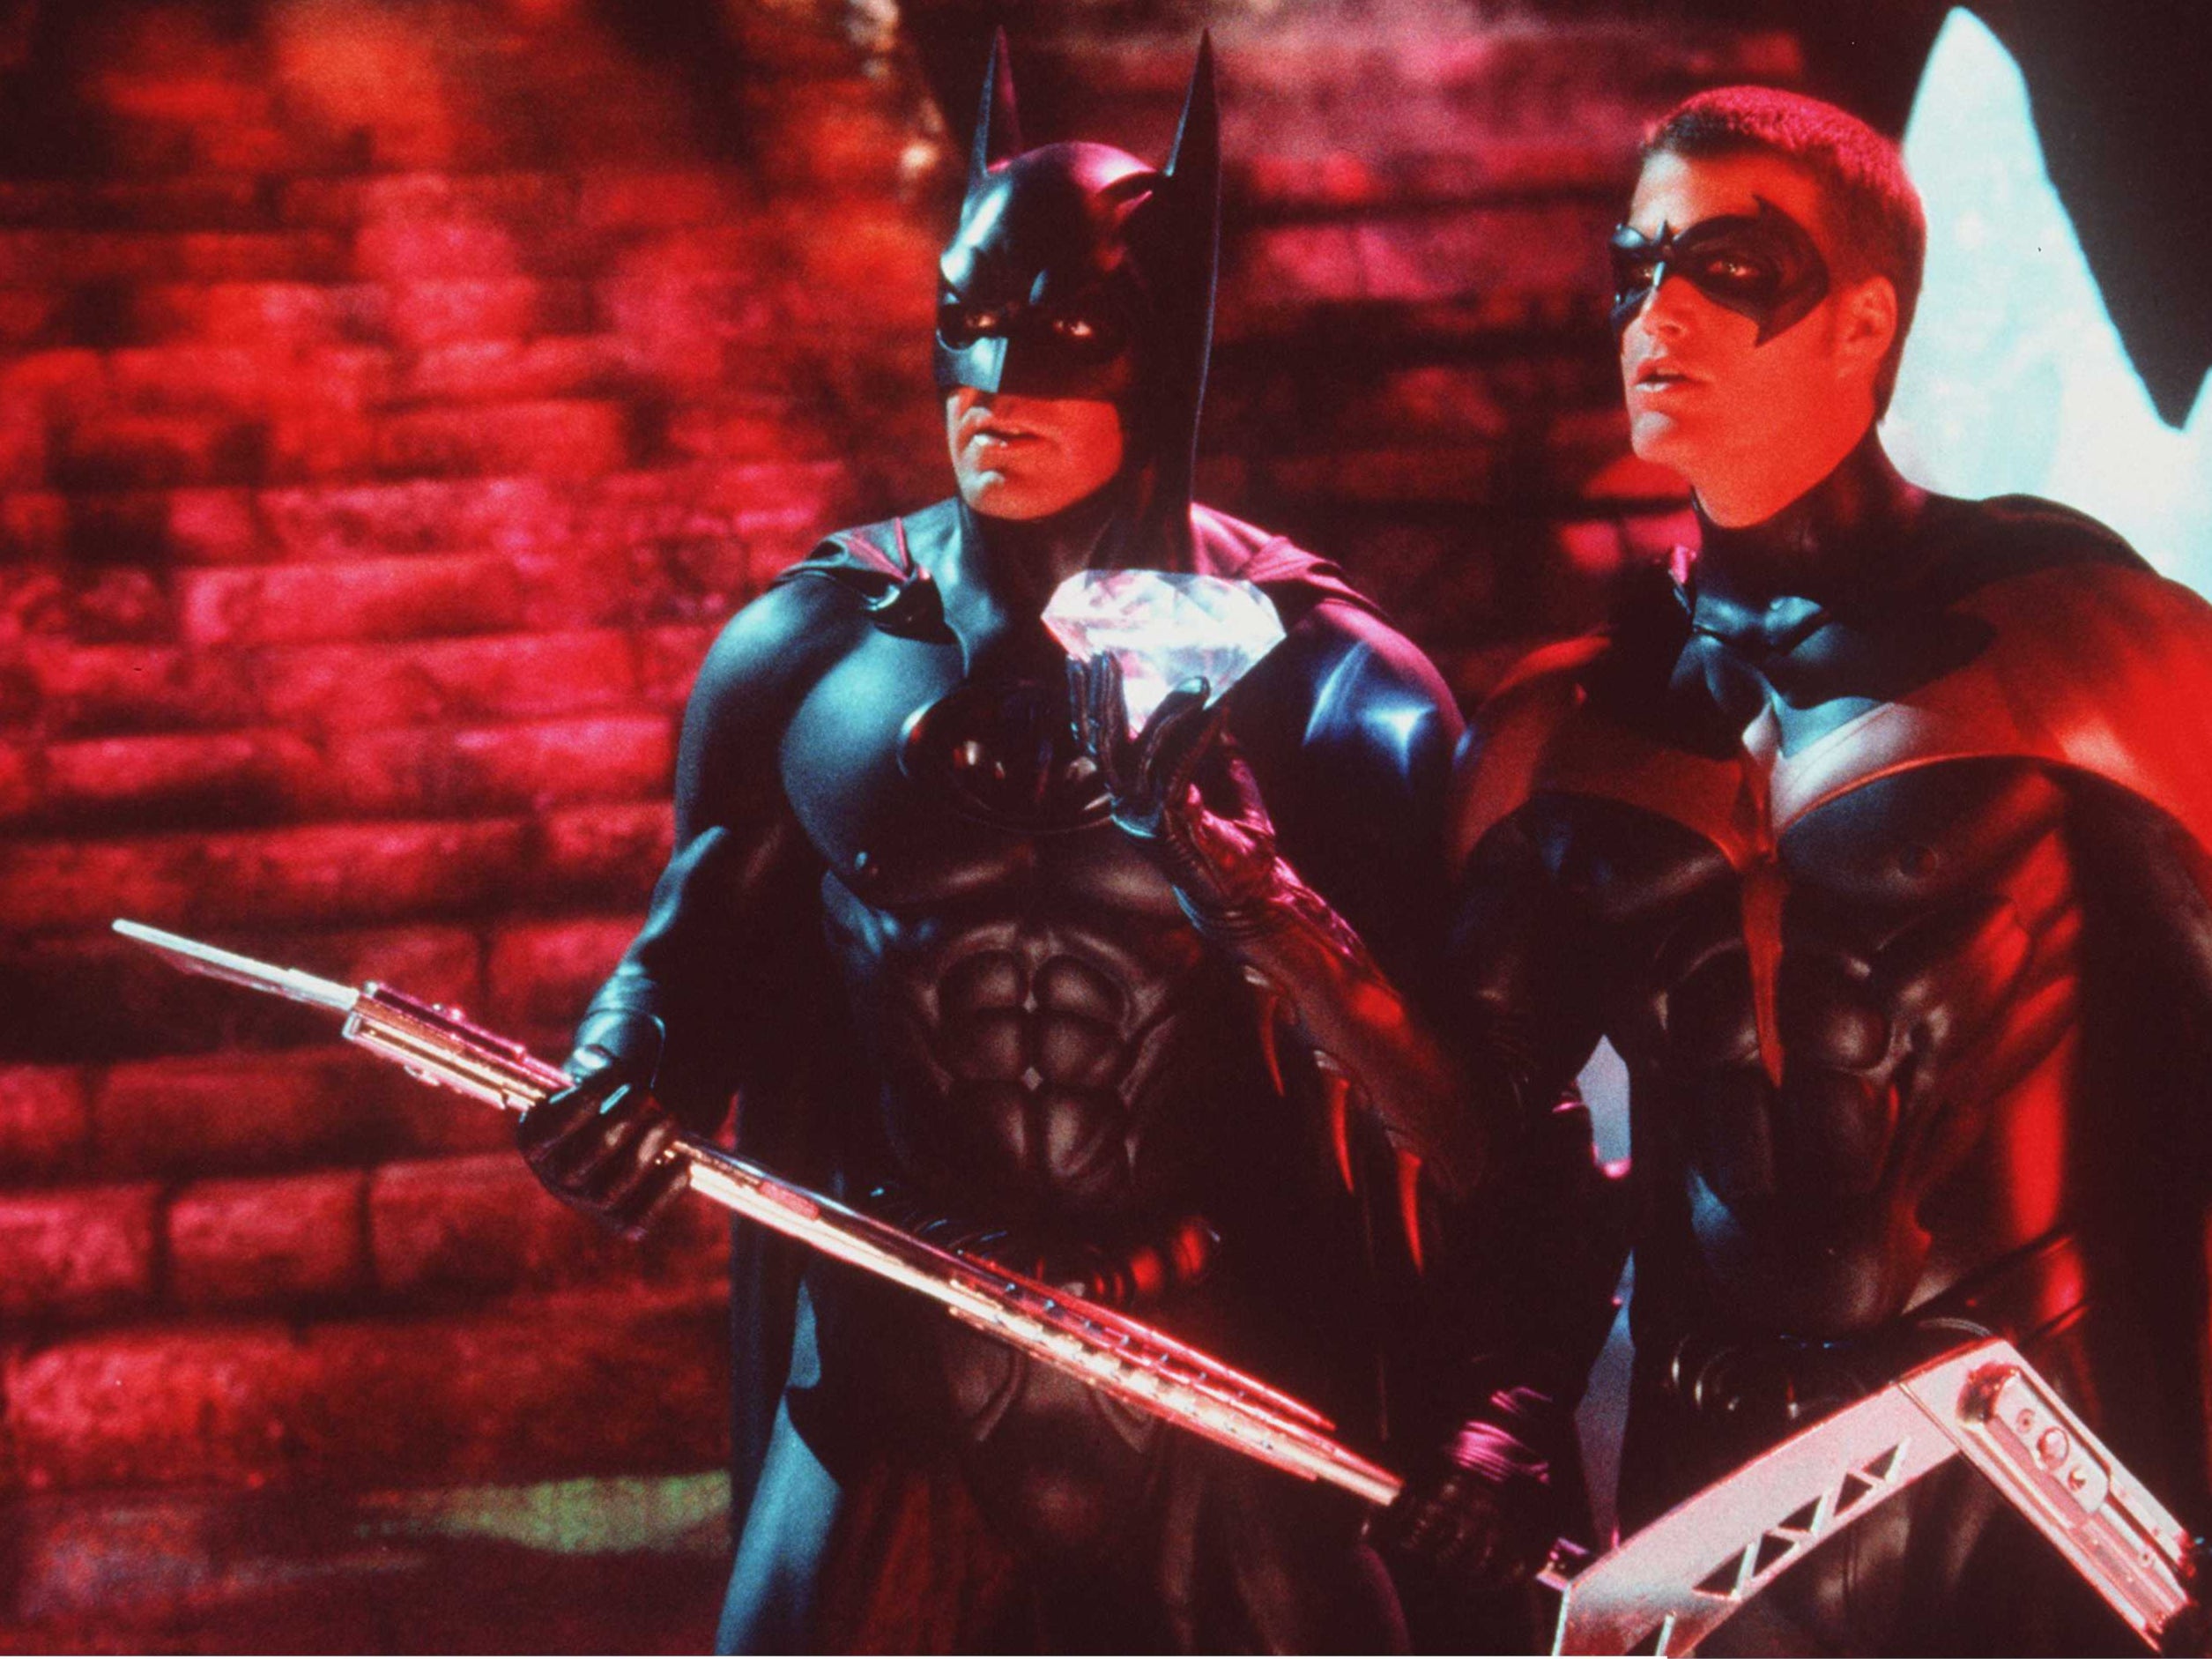 ‘Batman And Robin’ movie stills starring George Clooney and Chris O’Donnell